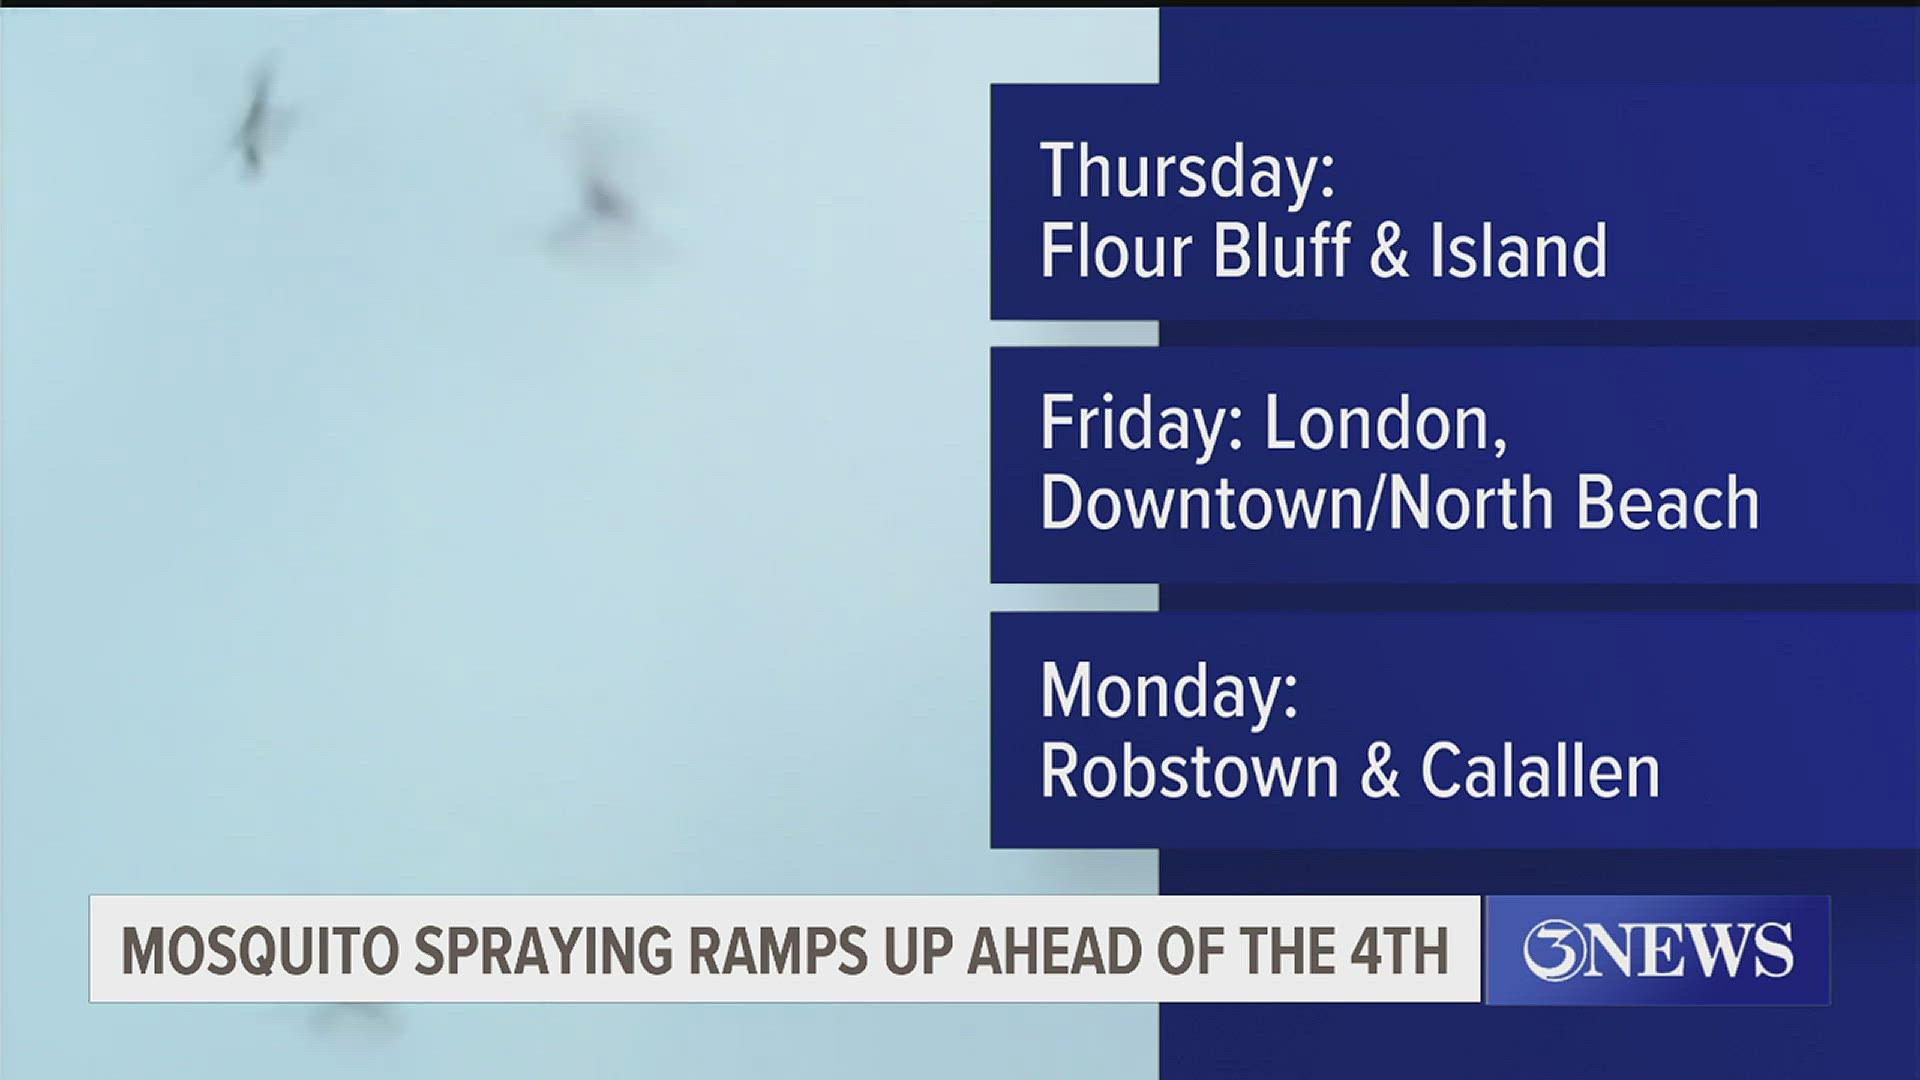 Efforts to be mosquito-free began tonight in Flour Bluff and out on The Island. On Friday you can expect to see them out in the London area, downtown and North Beach